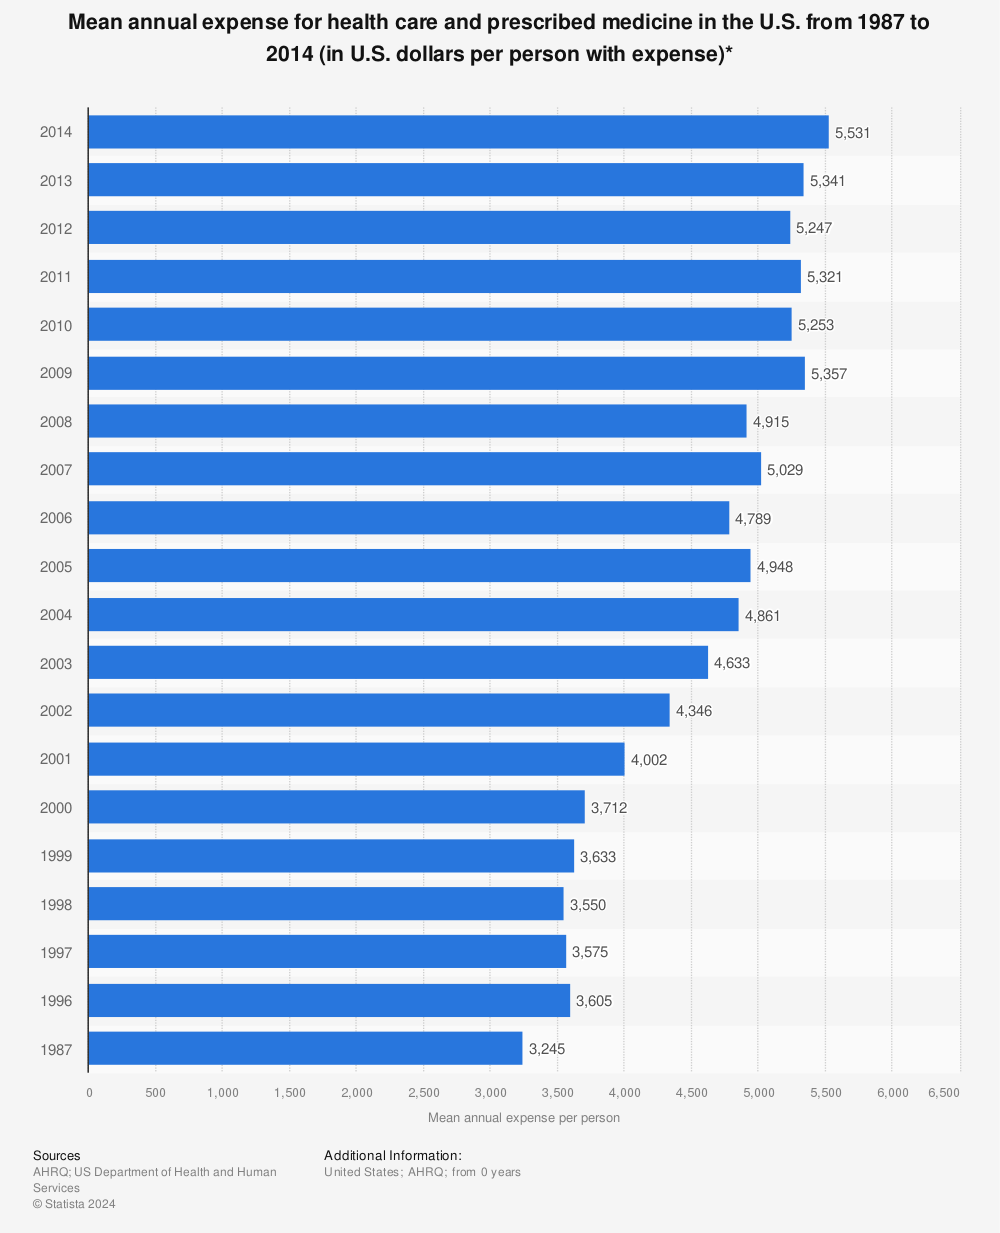 Statistic: Mean annual expense for health care and prescribed medicine in the U.S. from 1987 to 2014 (in U.S. dollars per person with expense)* | Statista